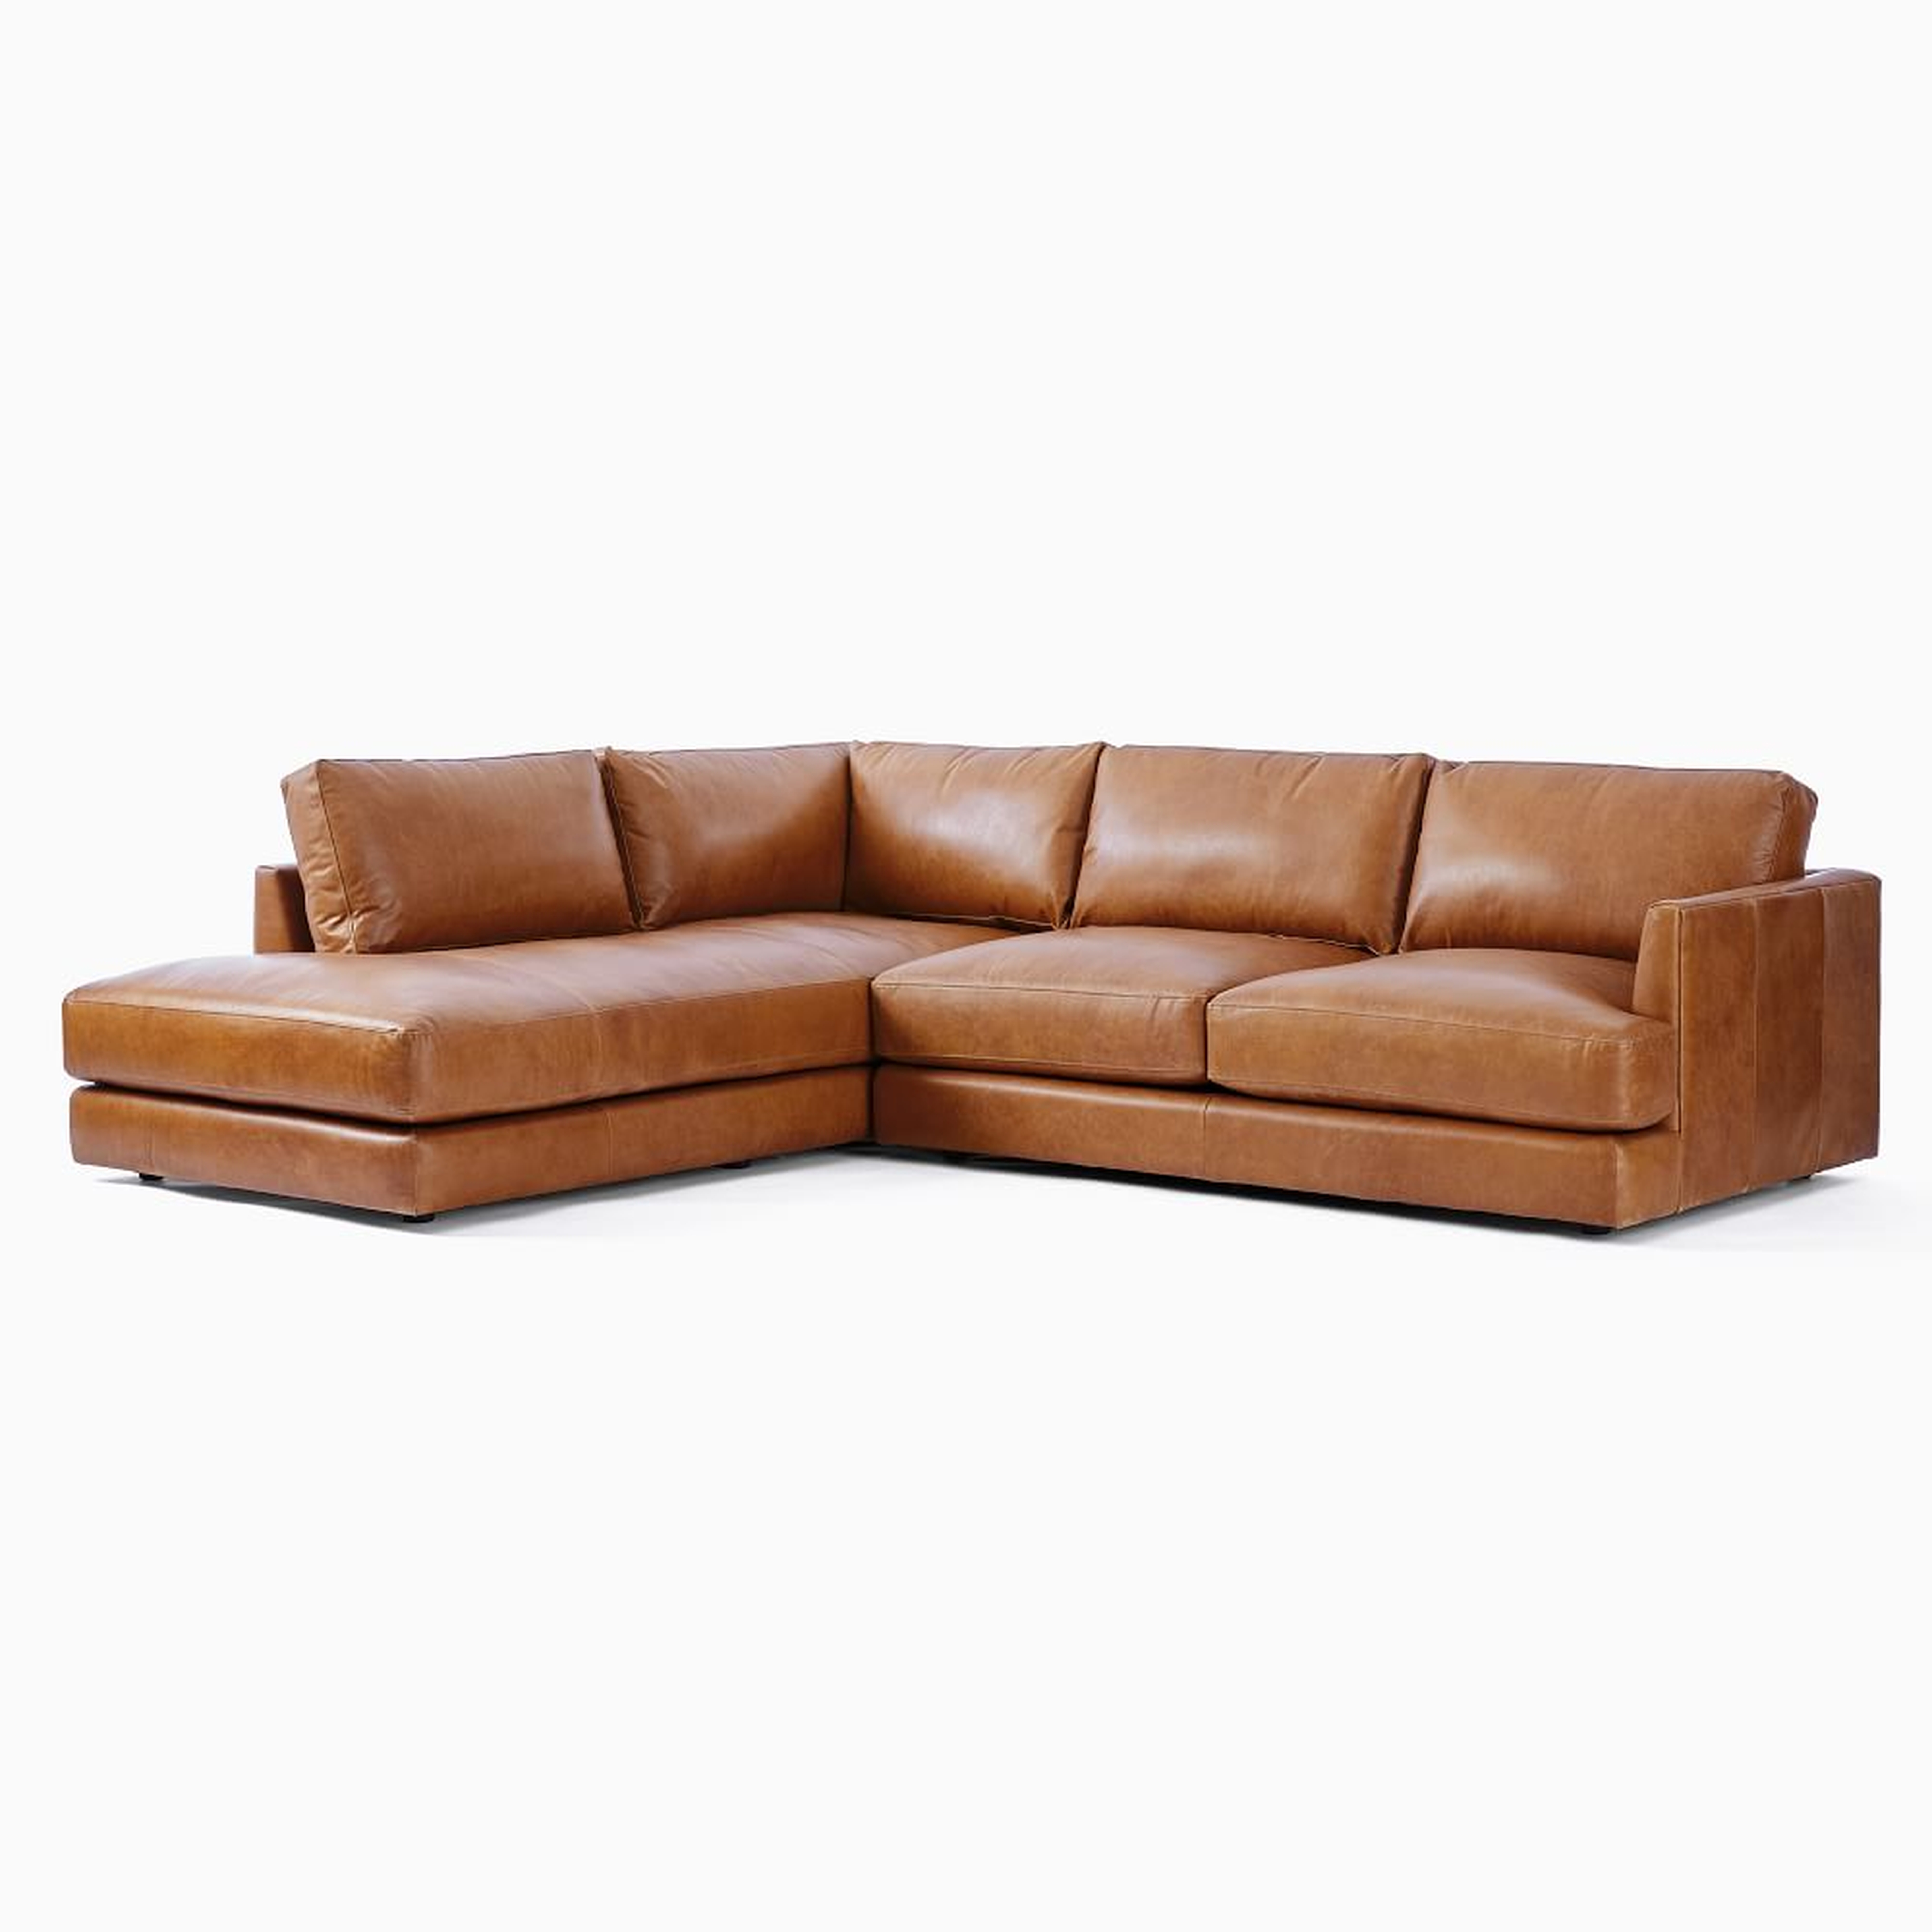 Haven Leather 2-Piece Bumper Chaise Sectional (108"Left 2-Piece Bumper Chaise Sectional) - West Elm